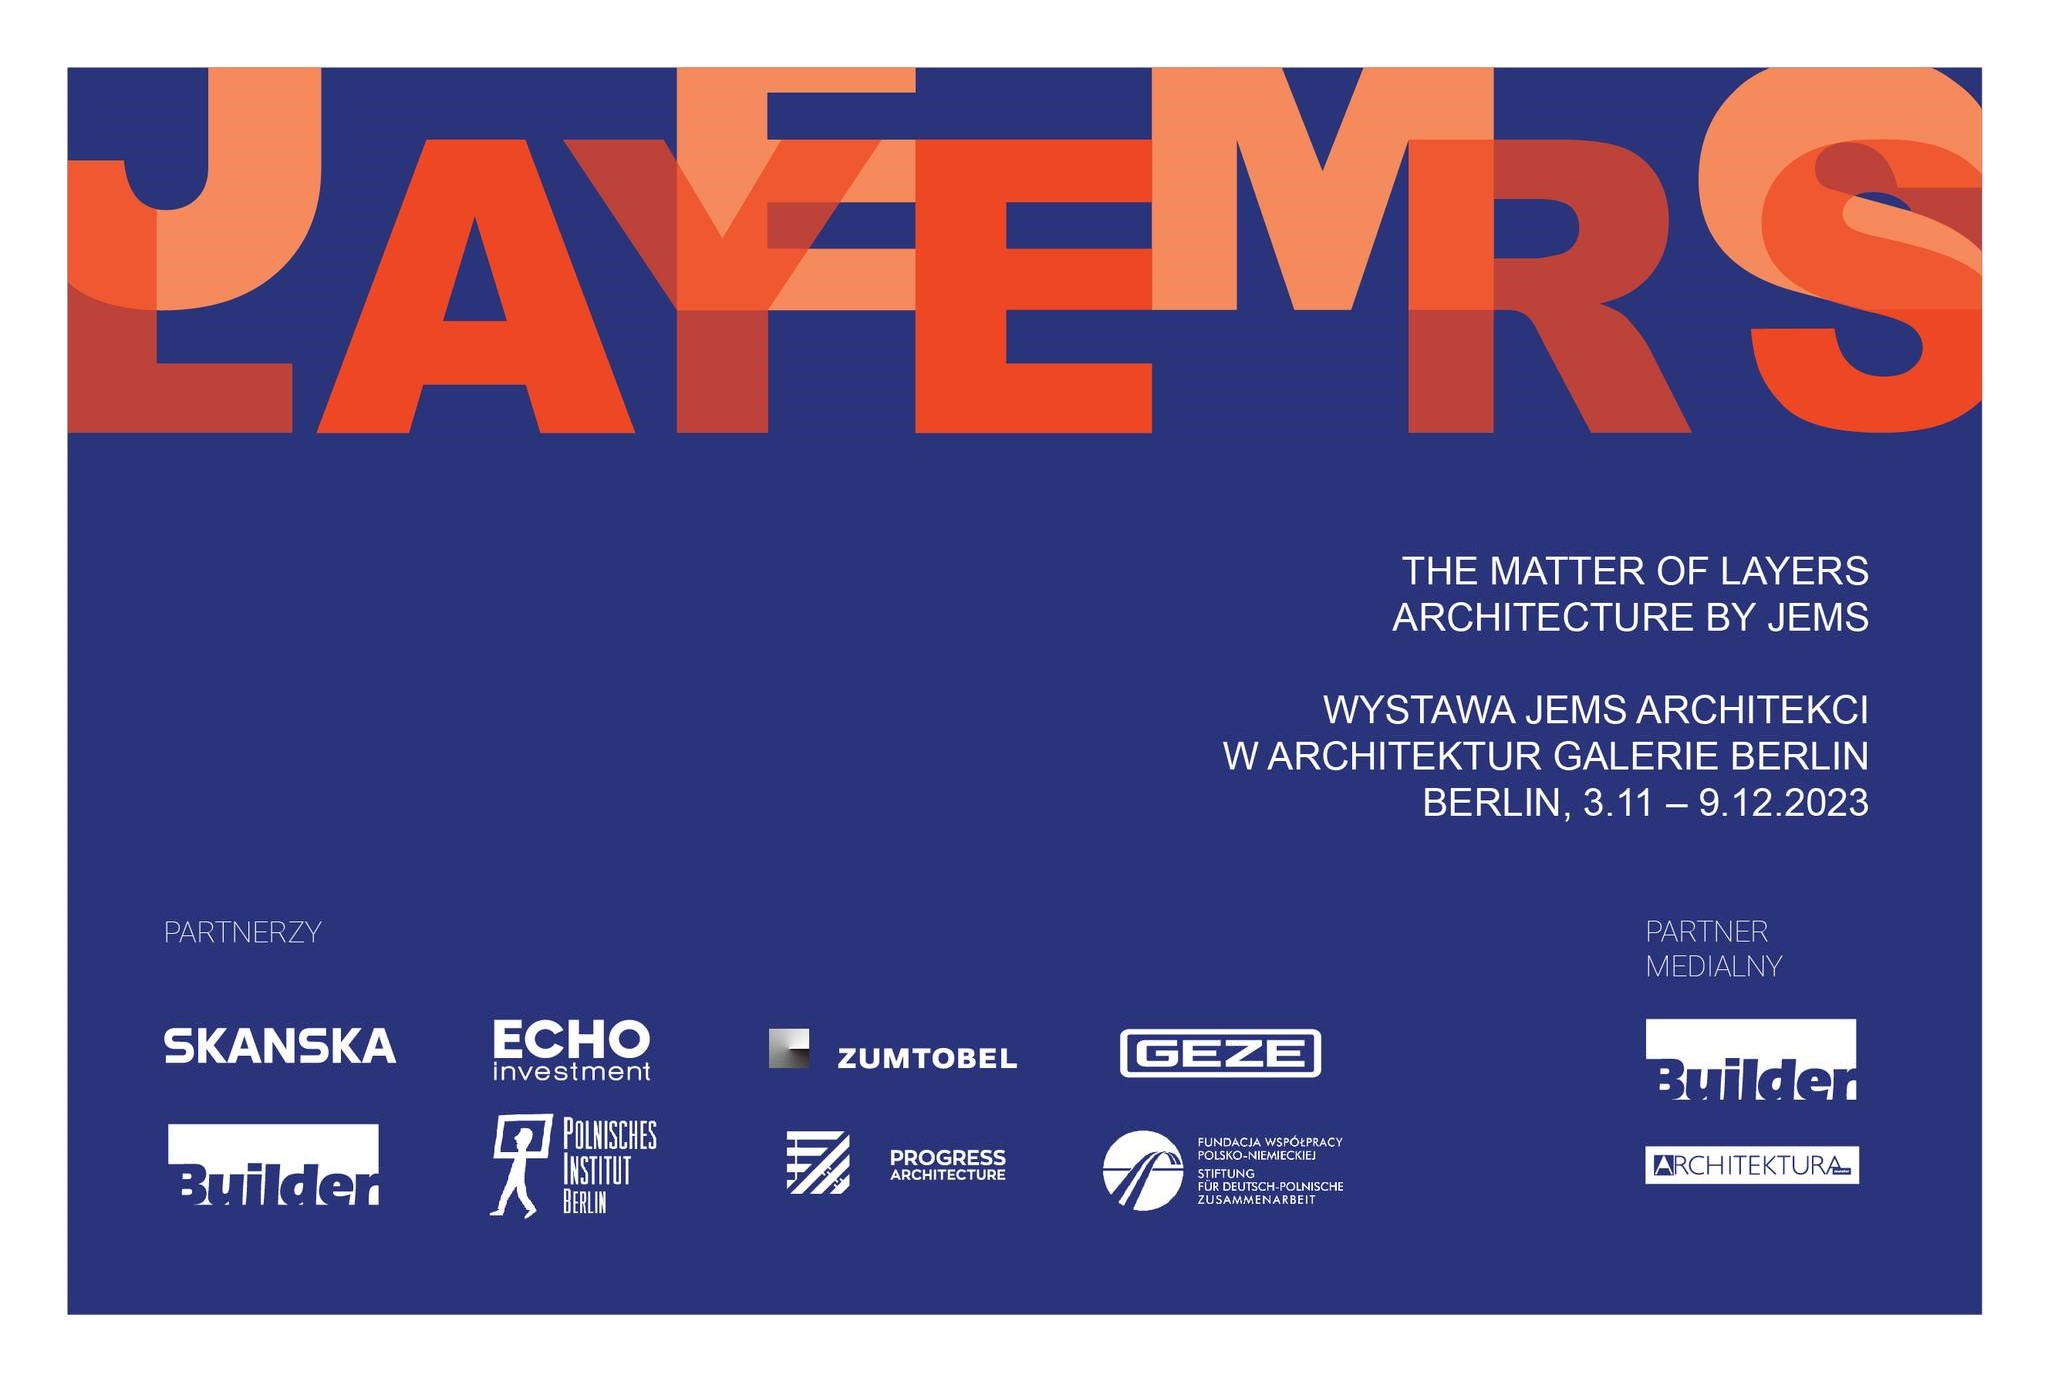 The Matter of Layers: The upcoming exhibition by JEMS at the Architektur Galerie Berlin